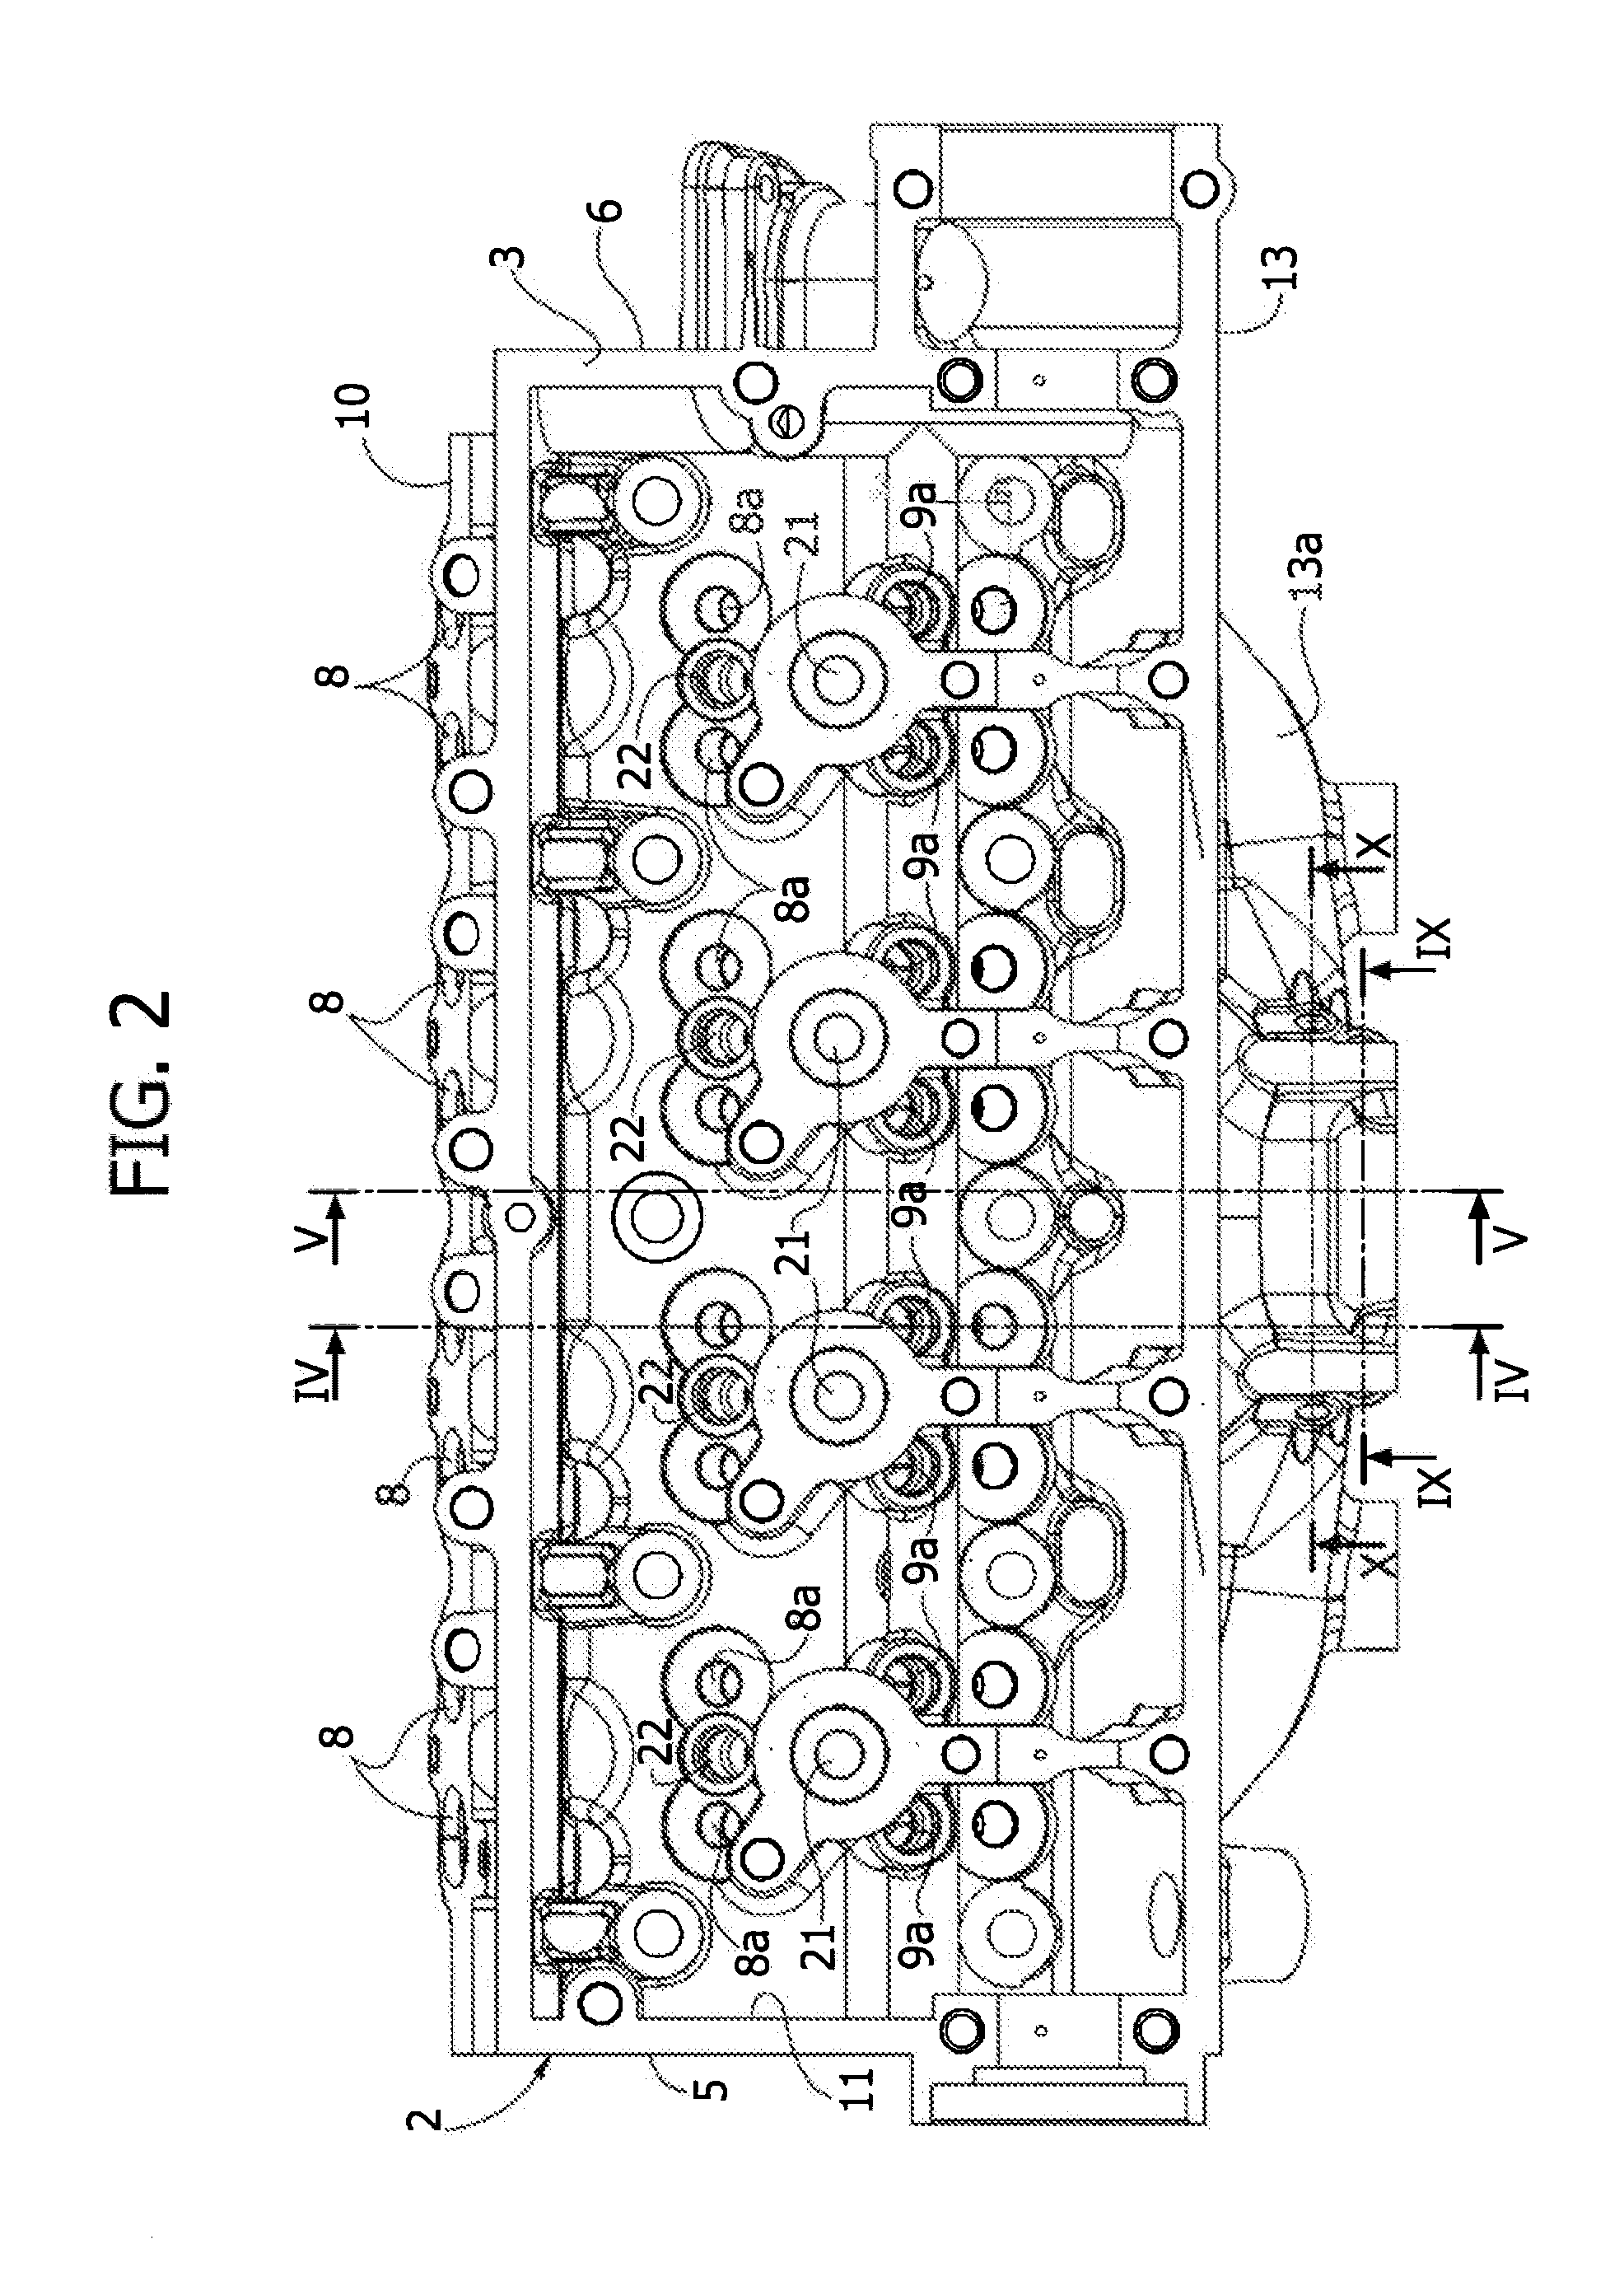 Cylinder Head for an Internal Combustion Engine, with Integrated Exhaust Manifold and Subgroups of Exhaust Conduits Merging into Manifold Portions which are Superimposed and Spaced Apart From Each Other